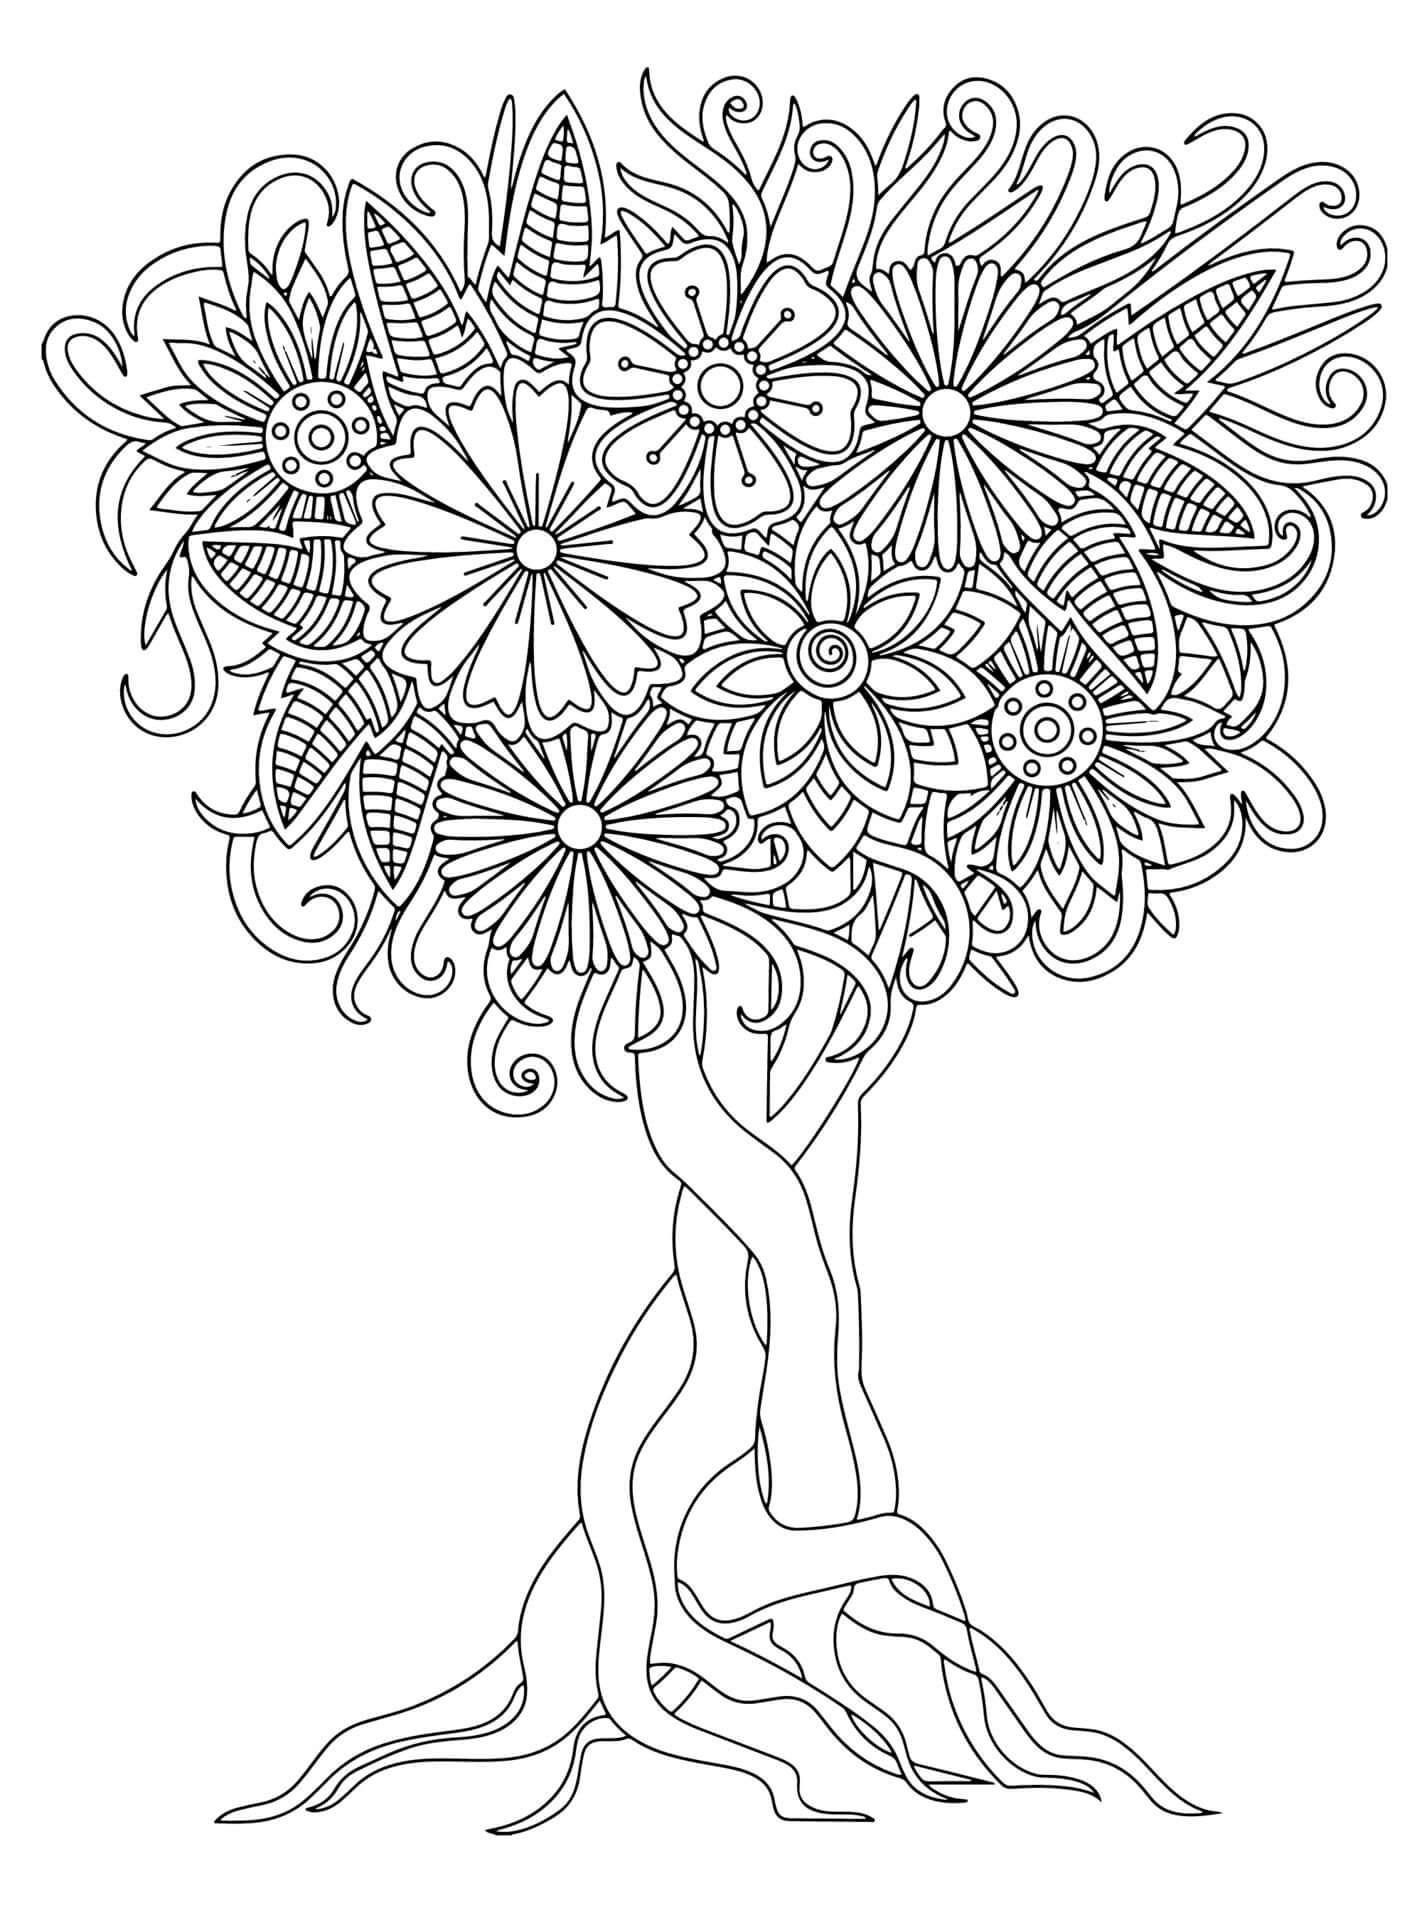 Mandala Tree With Flowers And Leaves Coloring Page Mandalas